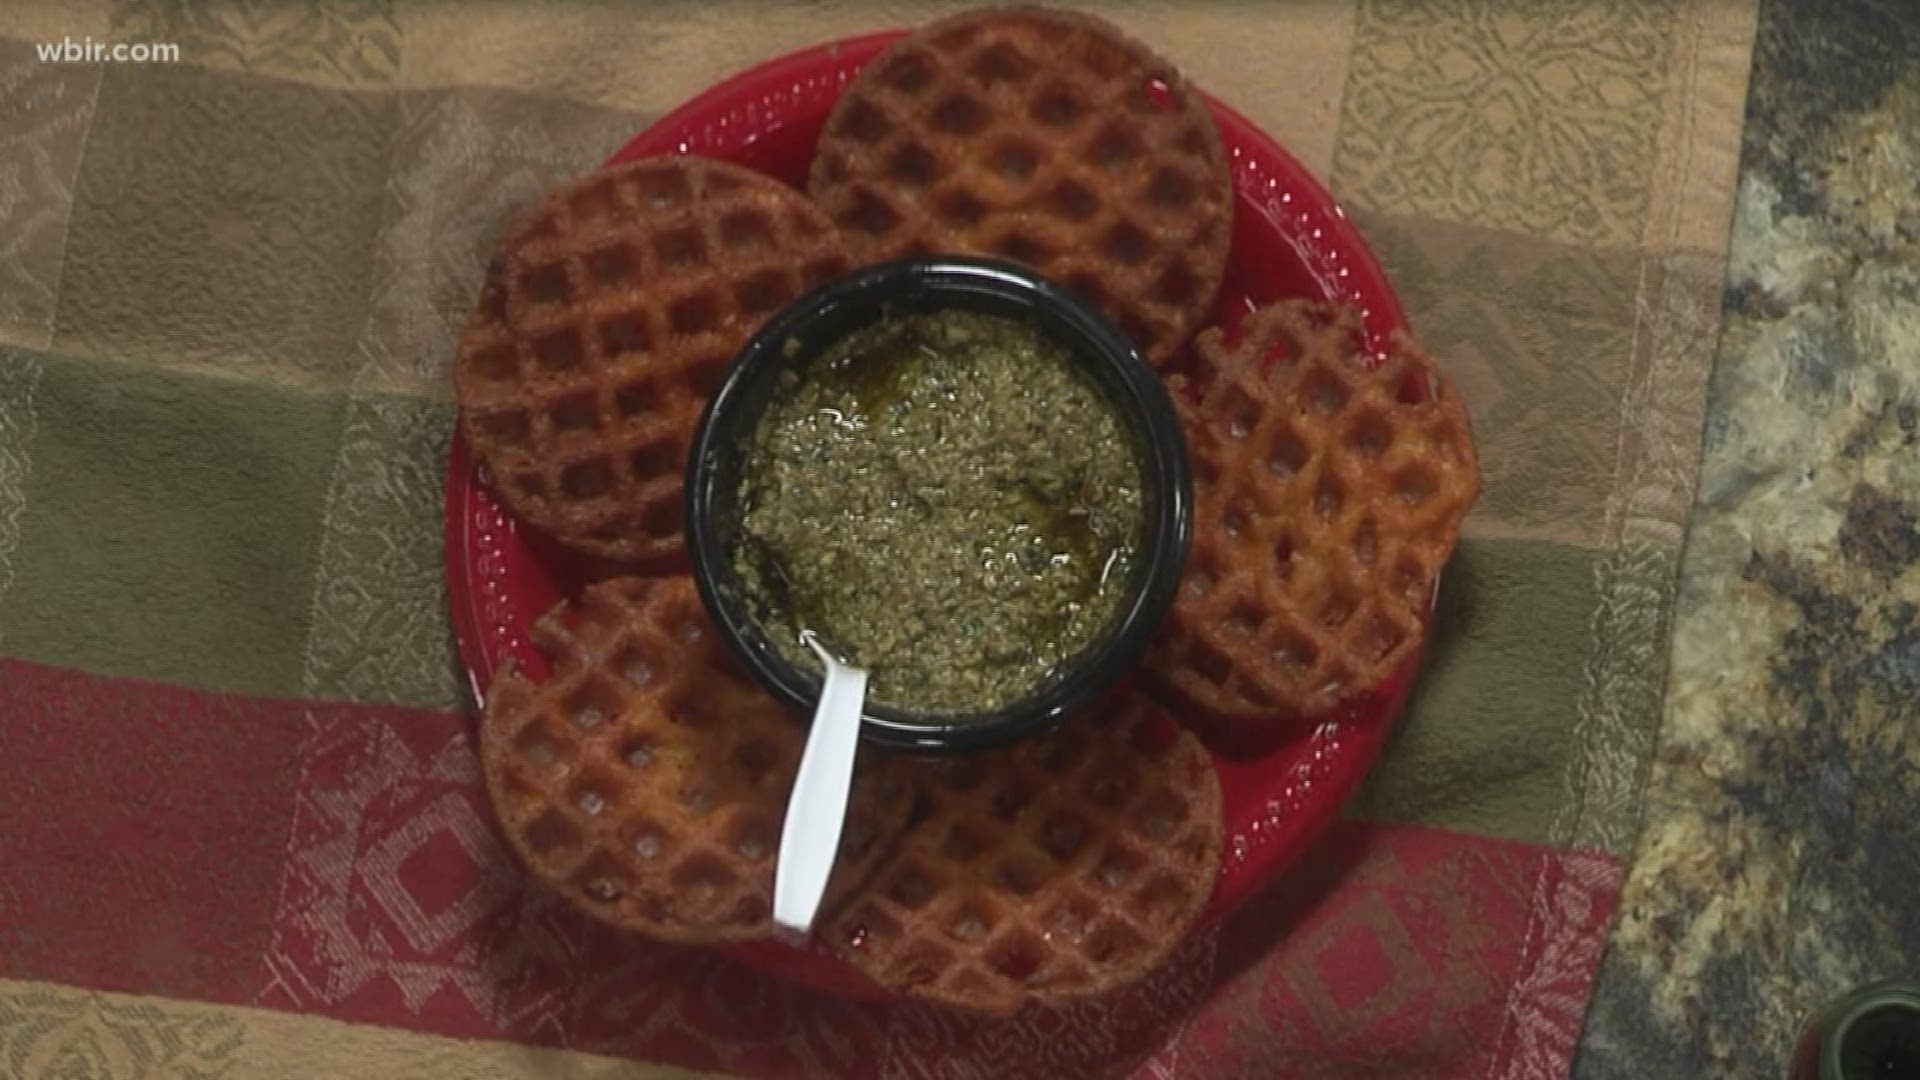 Capt. D.J. Corcoran with the Knoxville Fire Department shares a recipe for cheese waffles with a pesto sauce. Jan. 28, 2020-4pm.